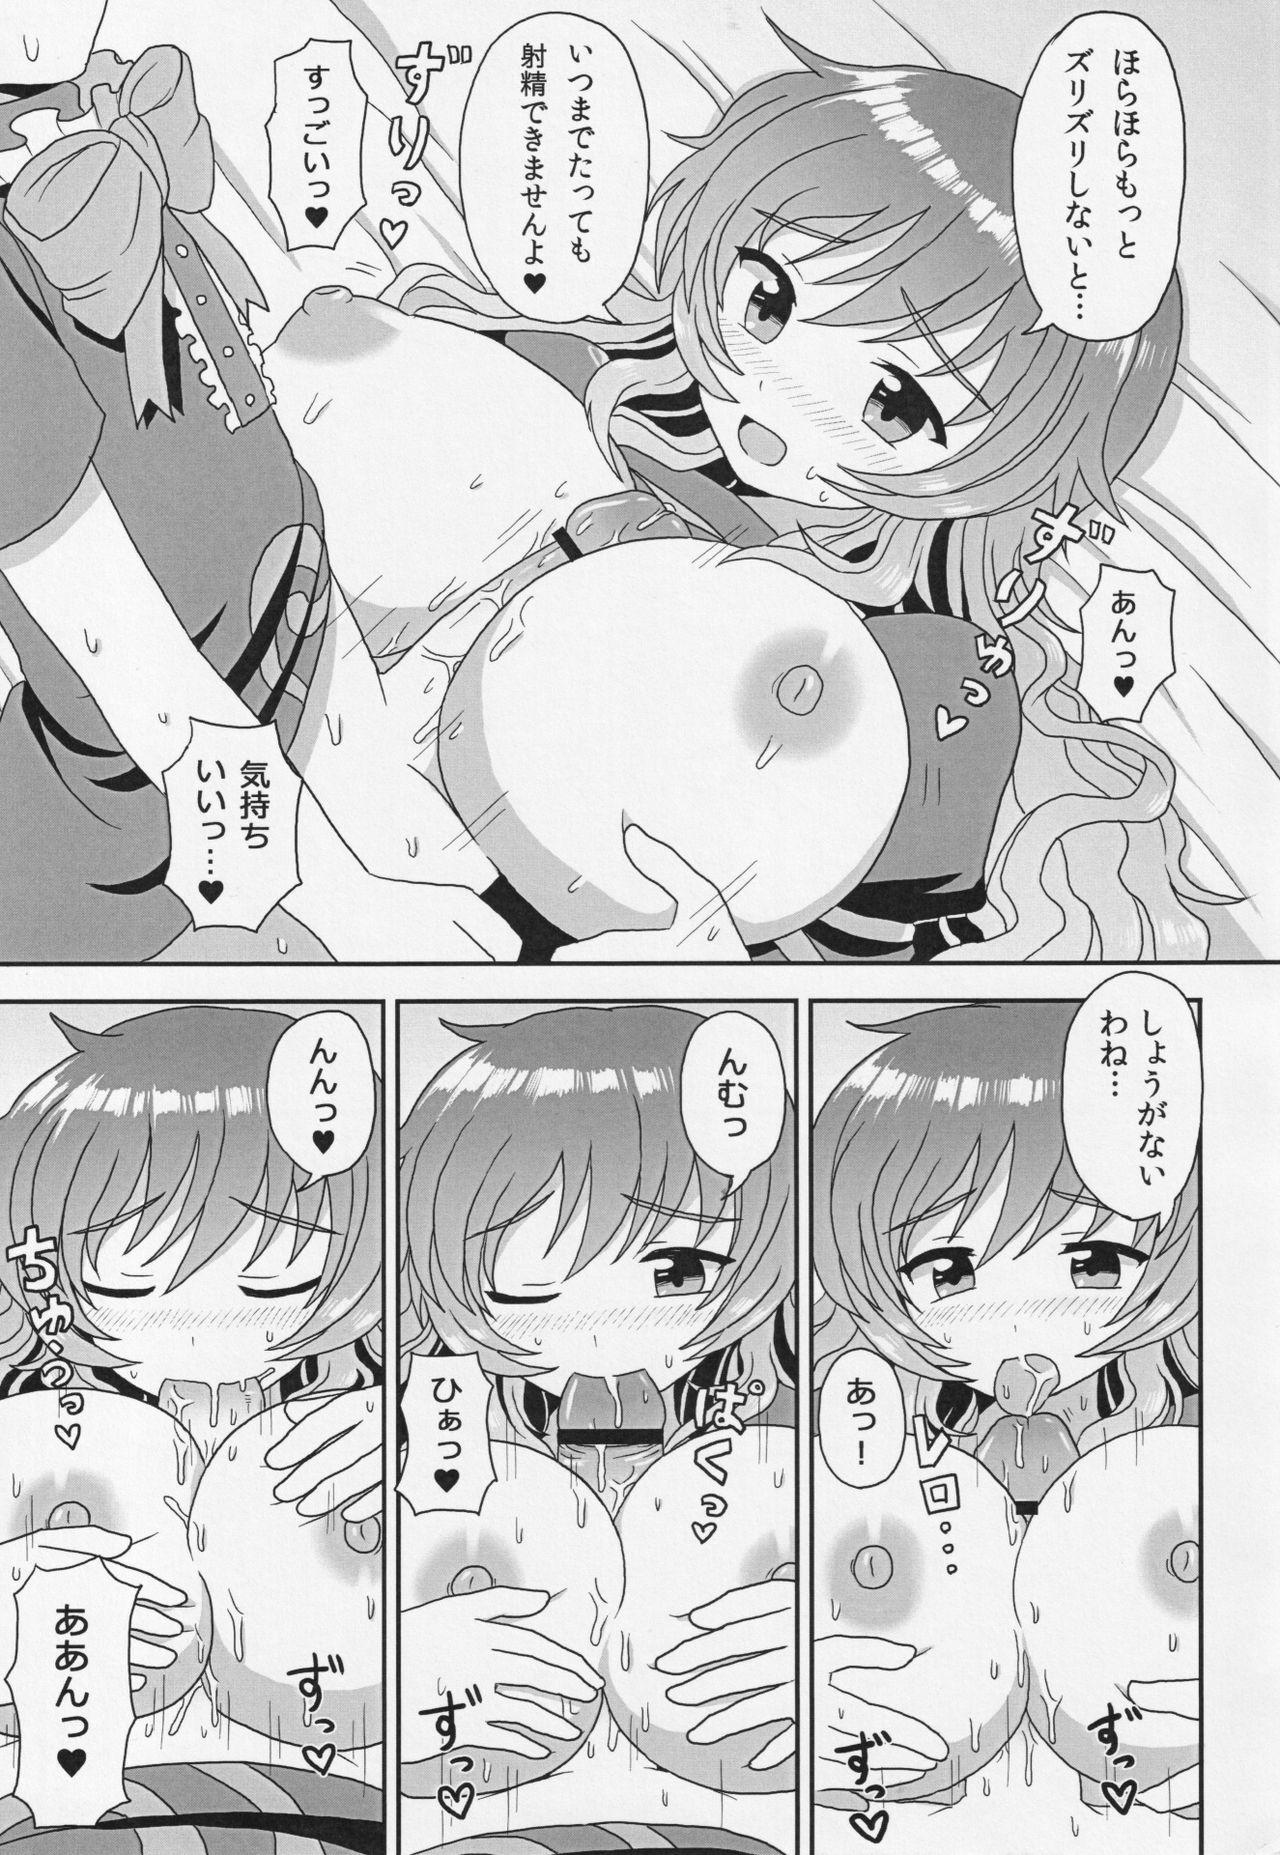 Spanking HH+ - Touhou project Women Sucking - Page 6